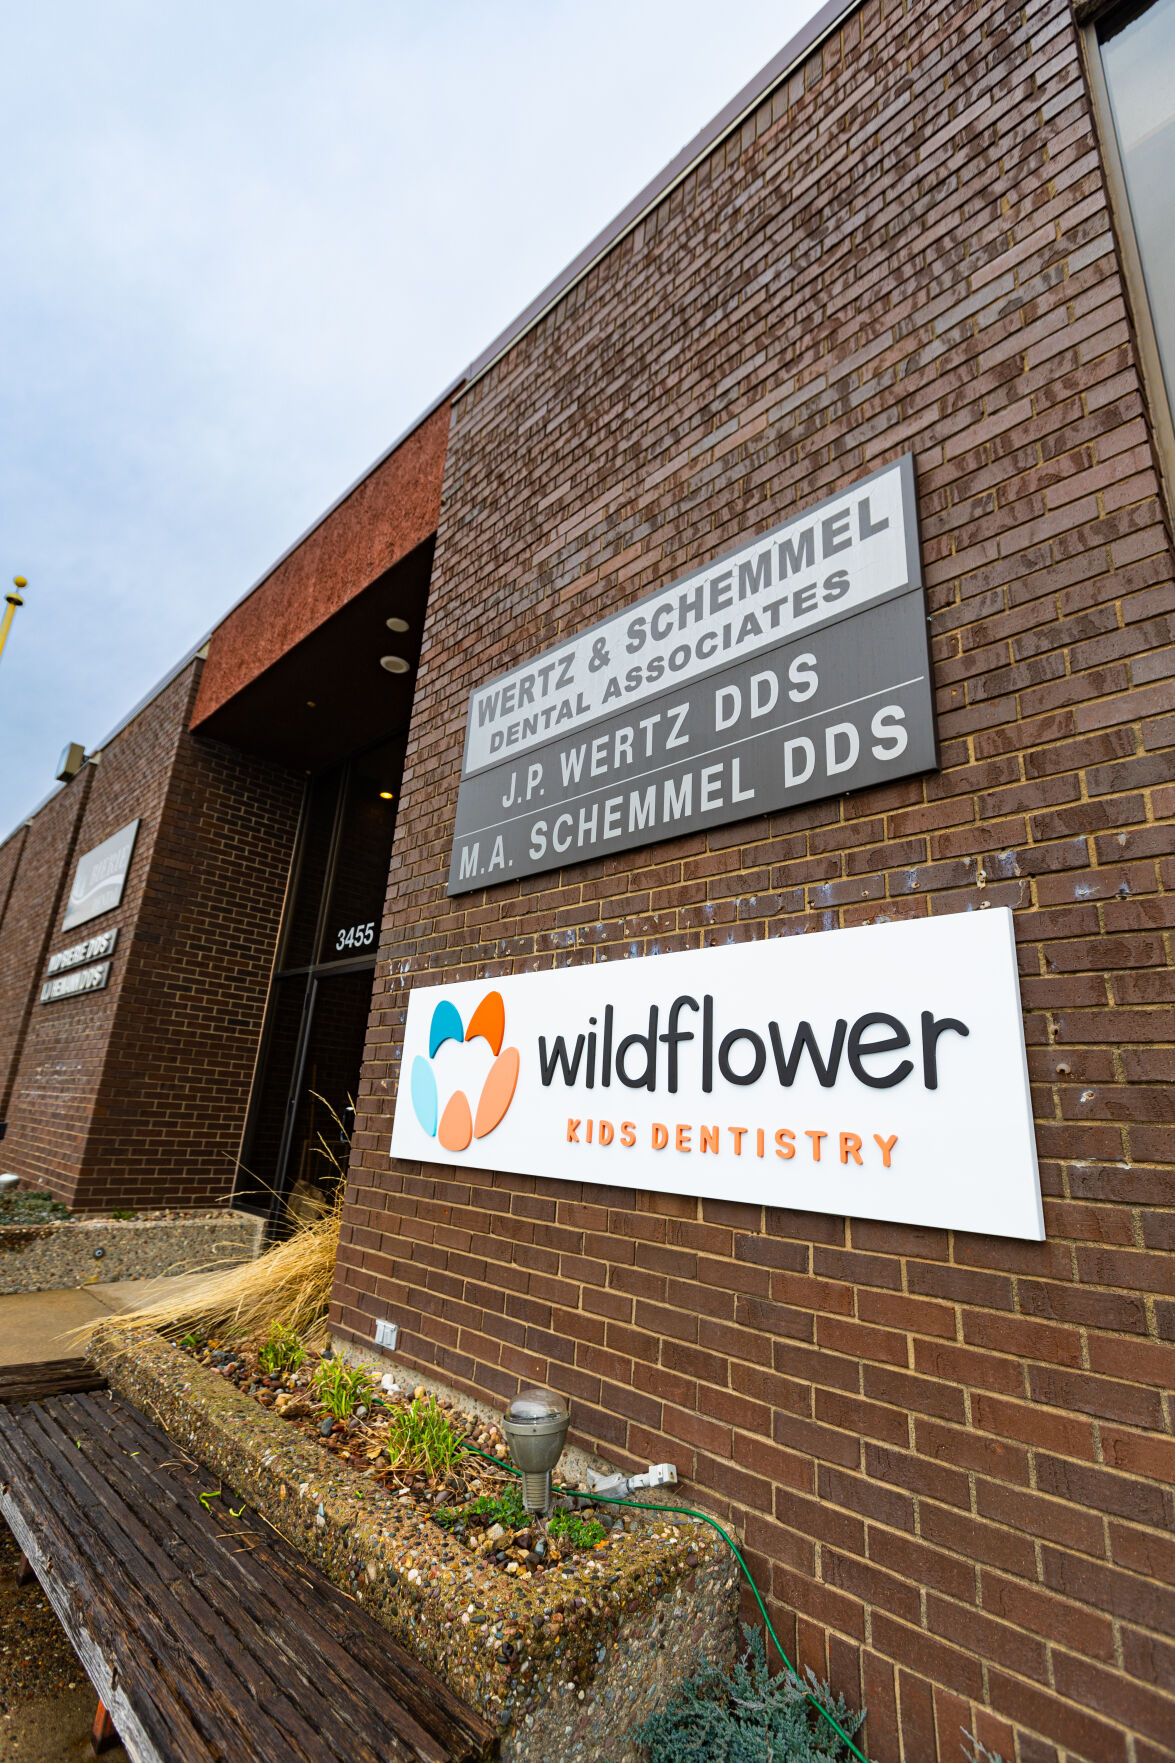 Wildflower Kids Dentistry, 3455 Stoneman Road, is under new ownership. The office specializes in pediatric dentistry, particularly patients age 12 and under.    PHOTO CREDIT: Thomas Eckermann